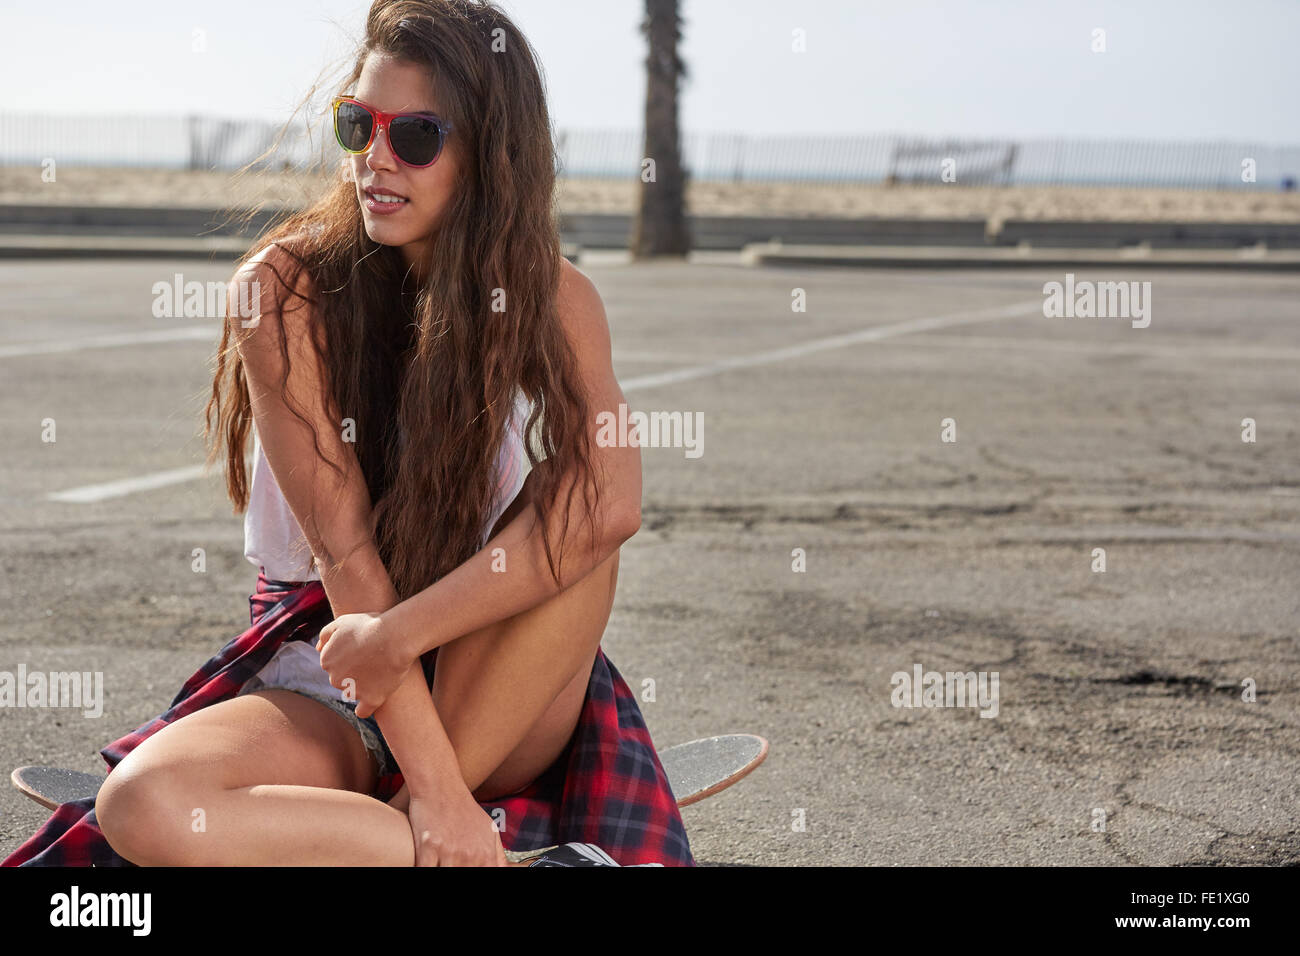 Fashion hipster cool girl in sunglasses Stock Photo